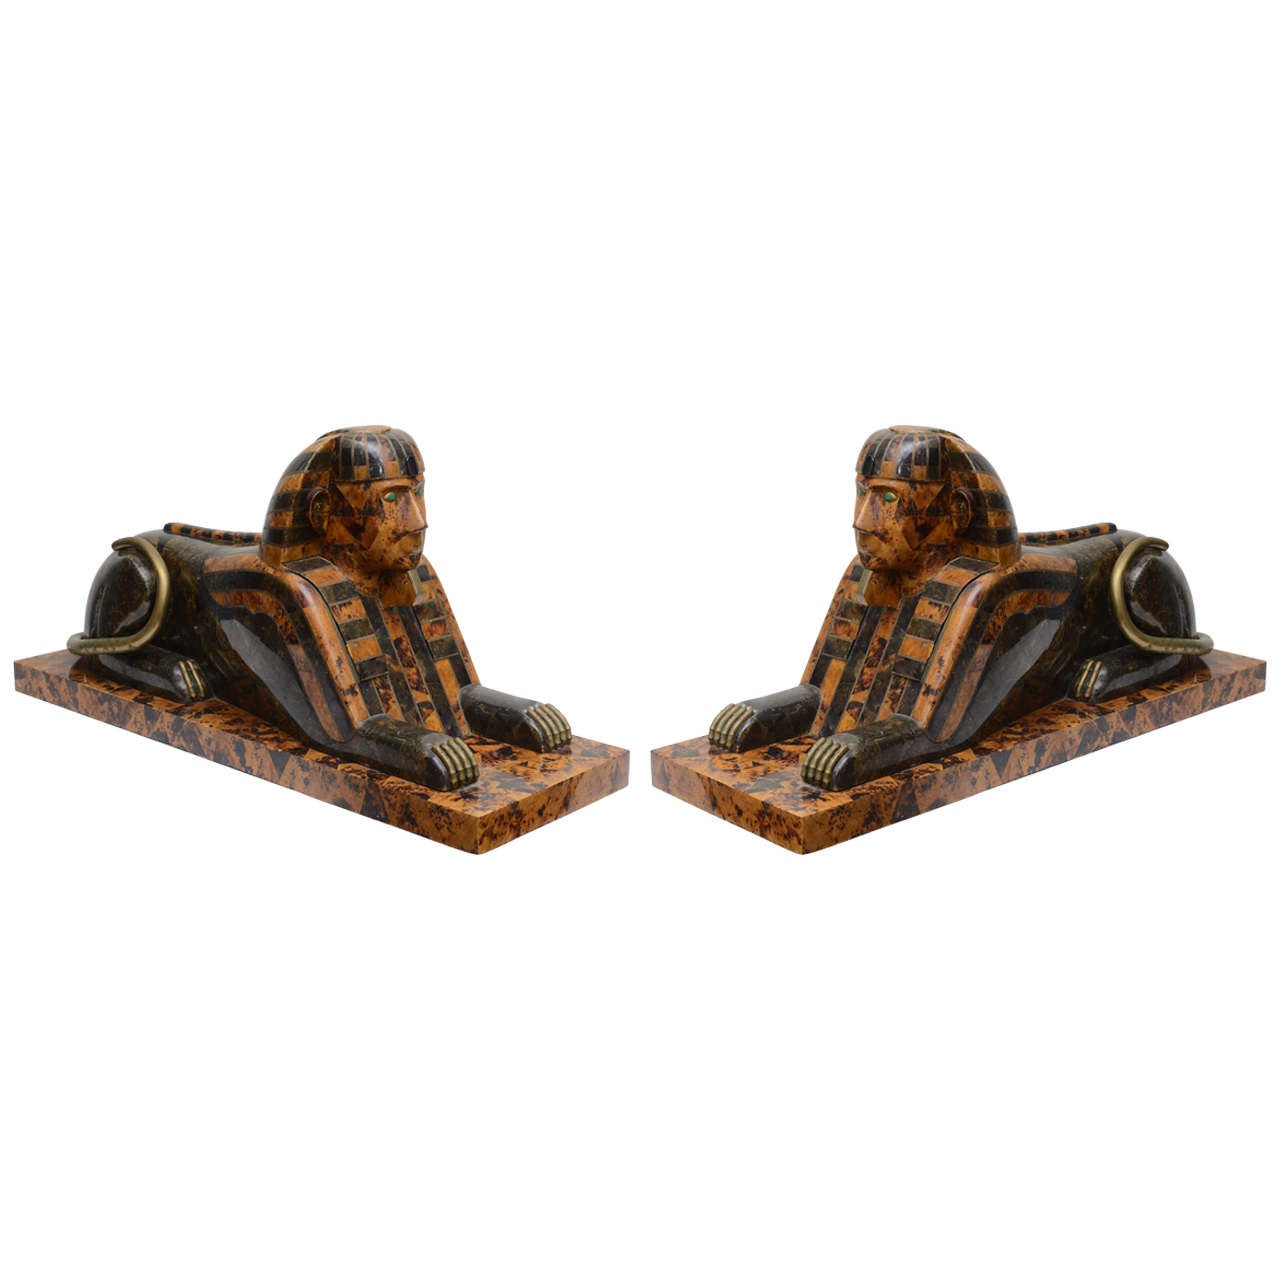 Pair of Marble and Bronze Sphinxes For Sale